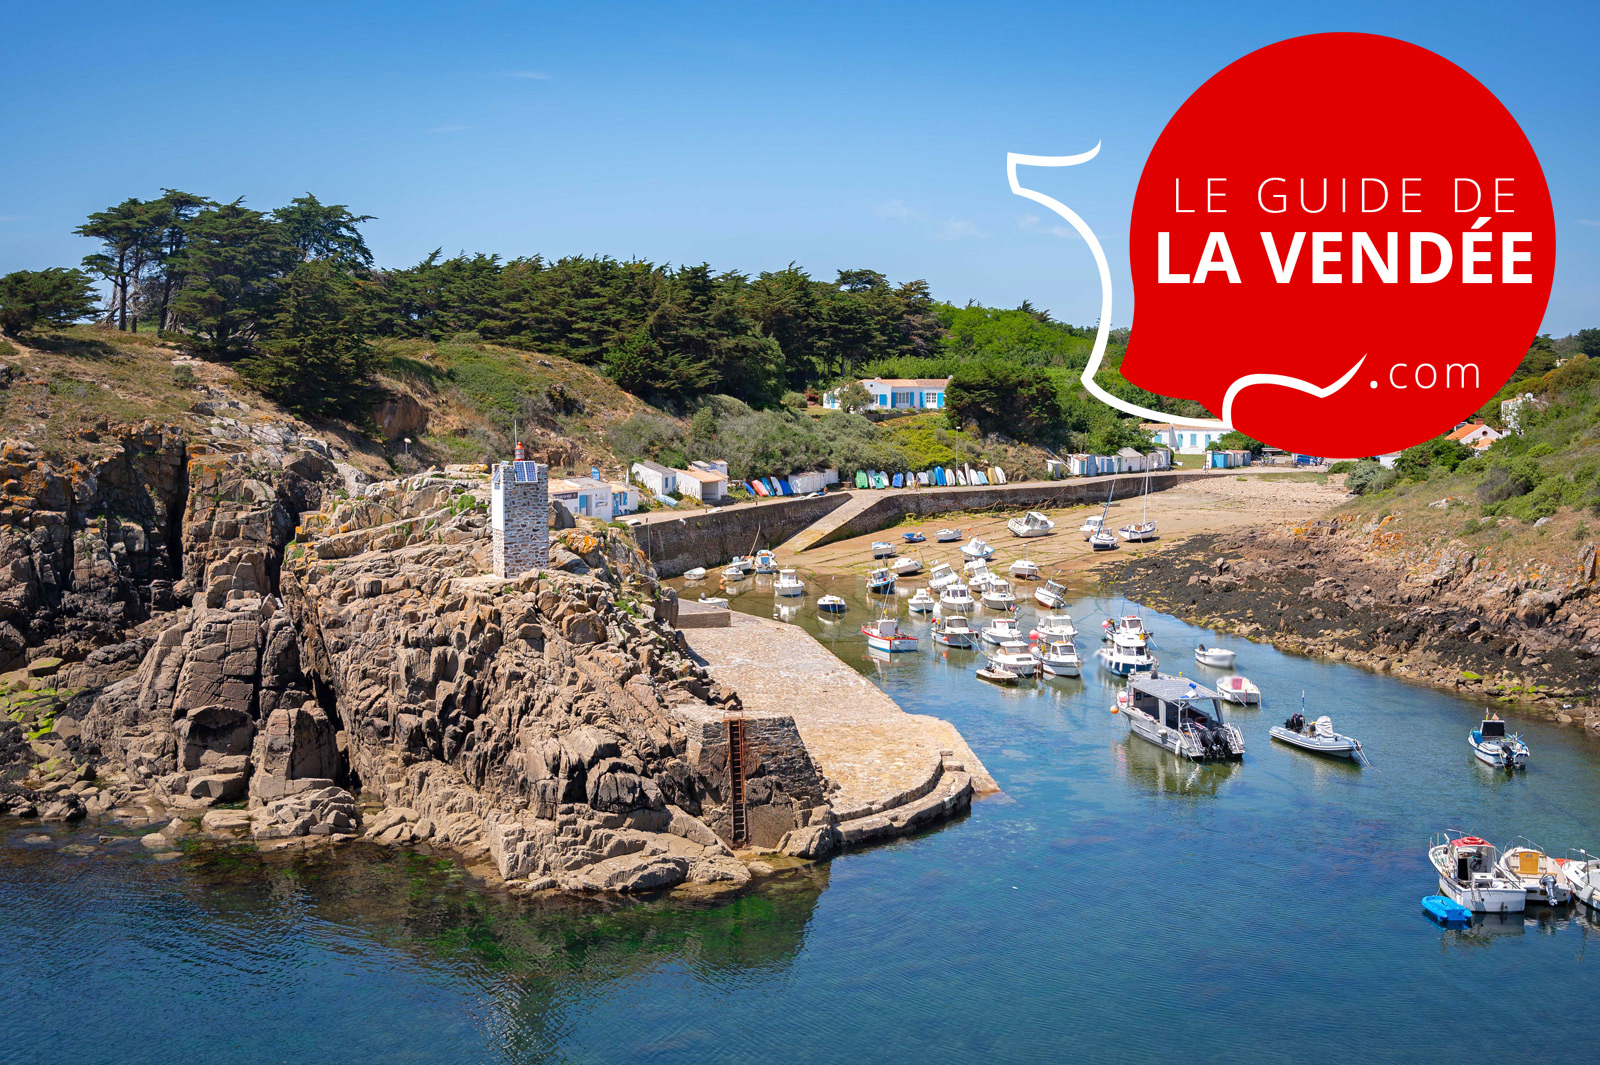 You are currently viewing Our new regional guide: Le Guide de la Vendée